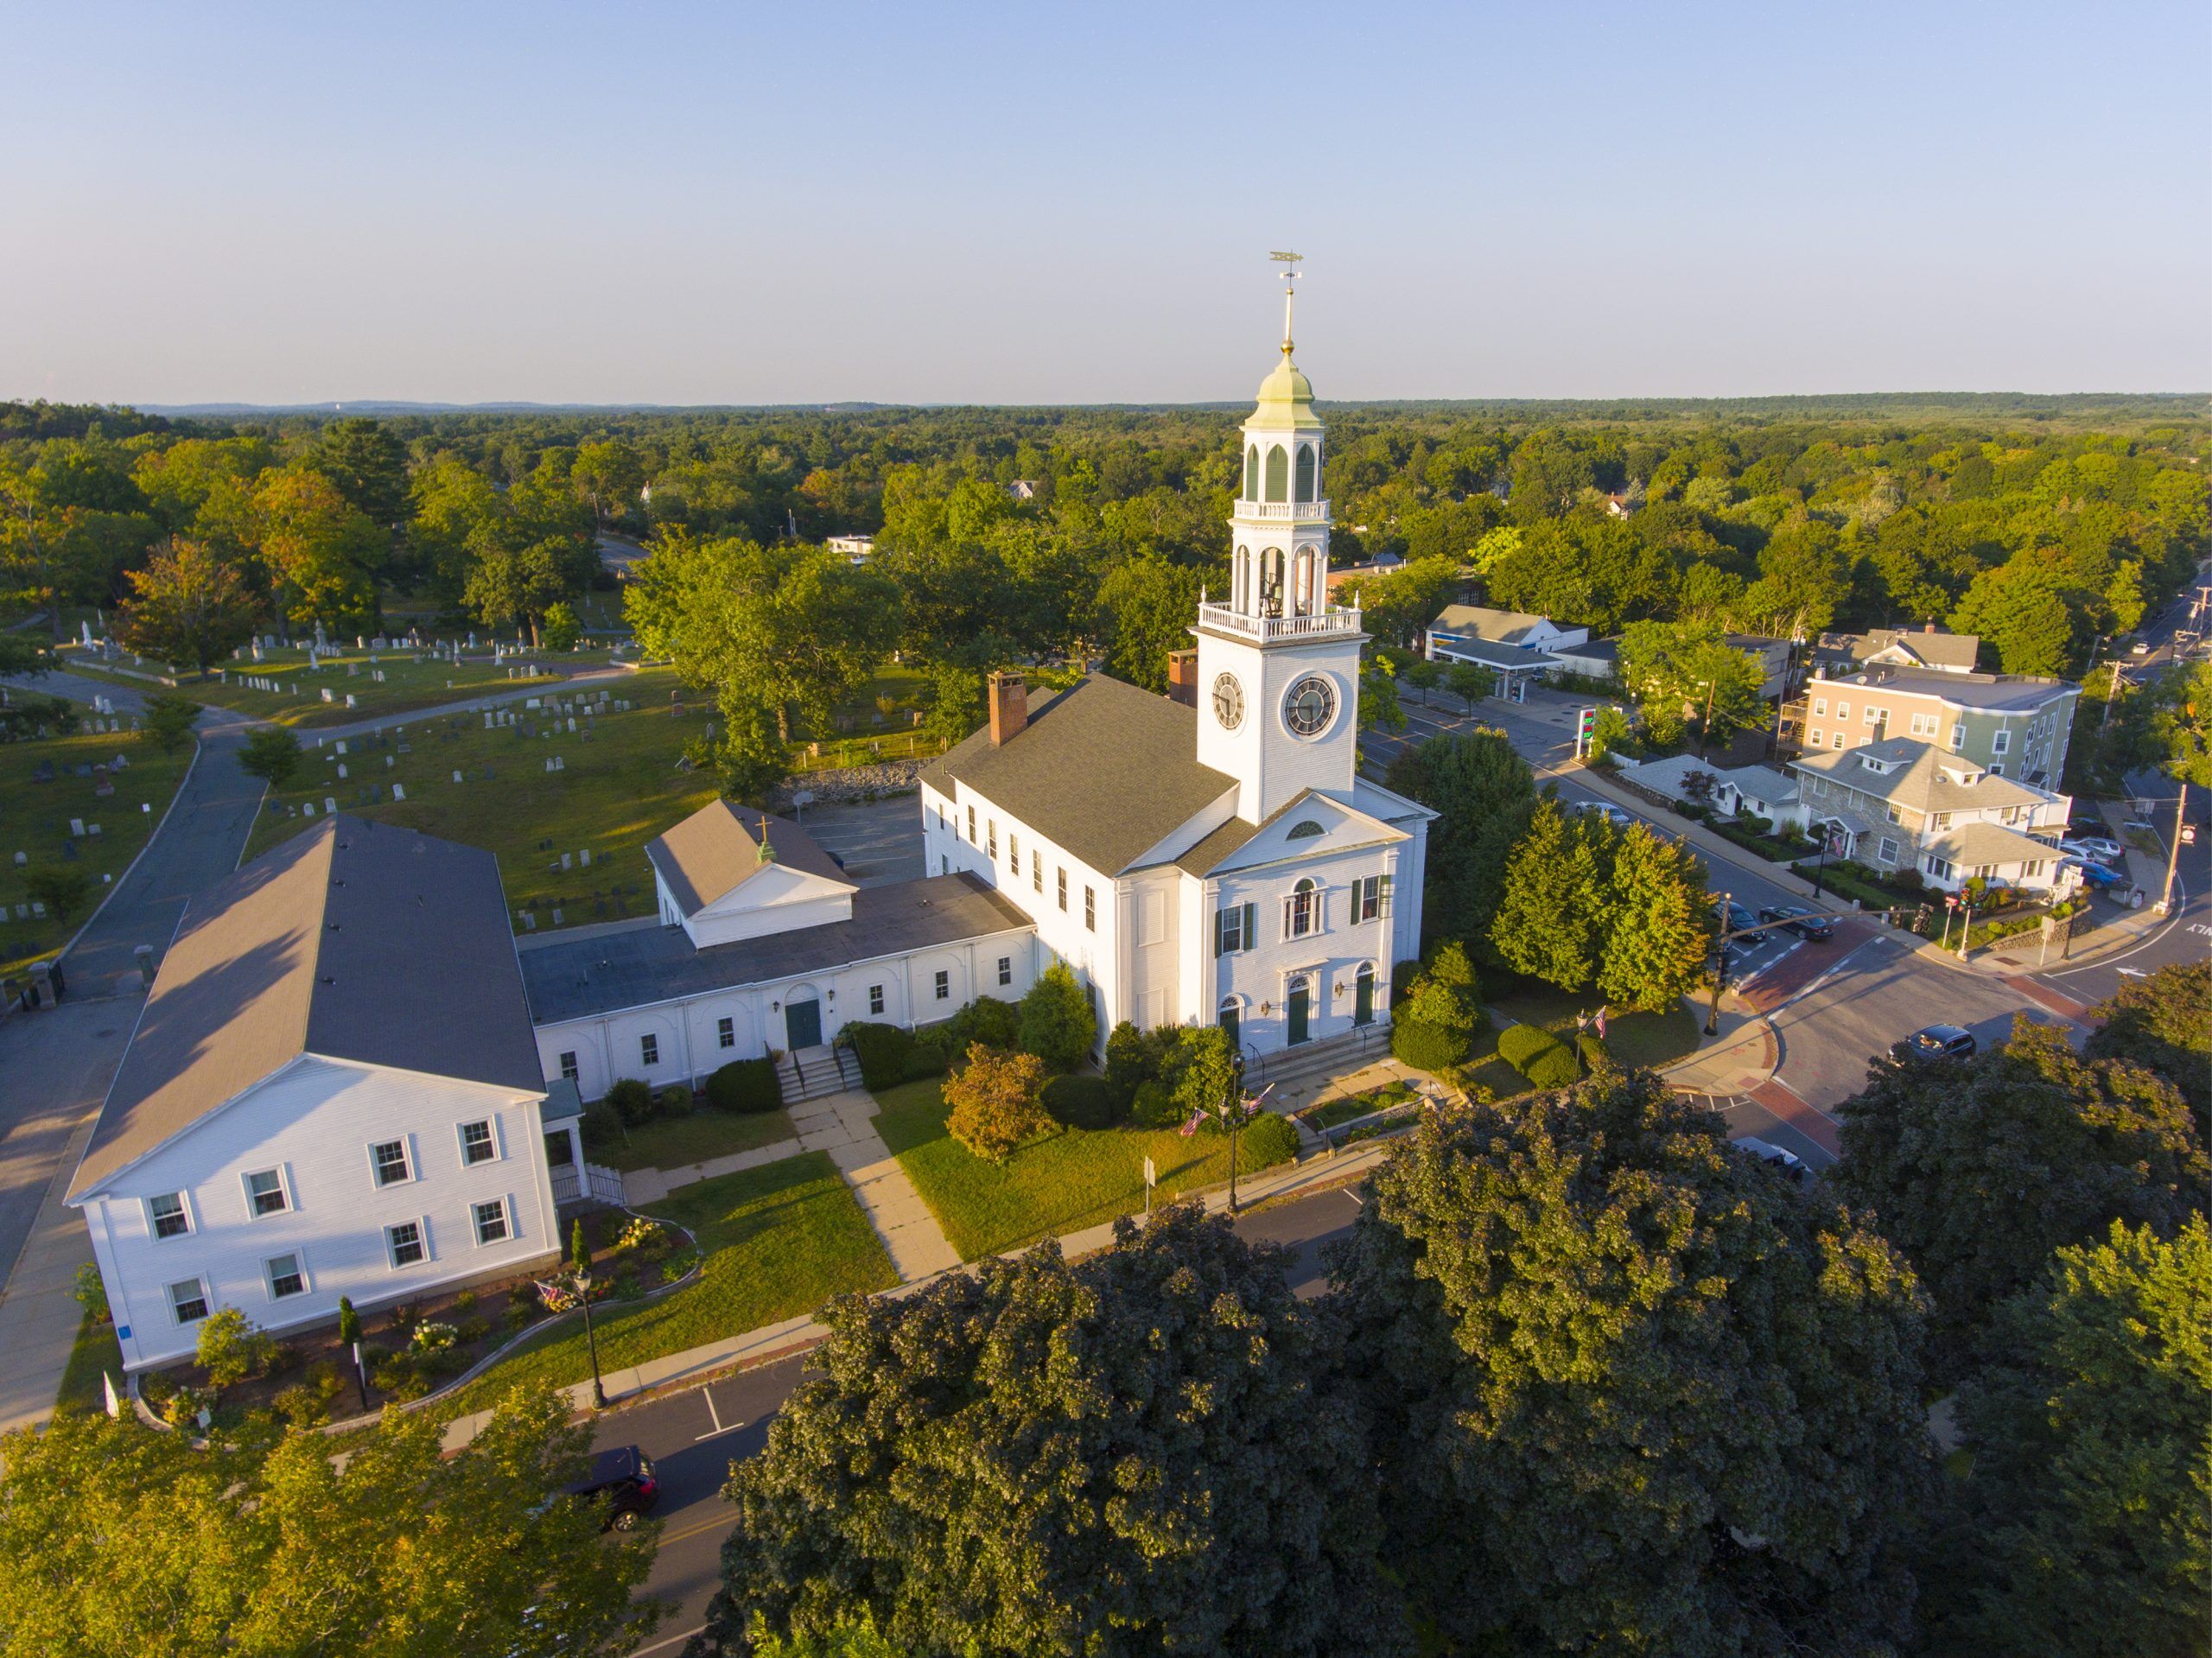 Aerial view of Old South United Methodist Church in the historic town center of Reading, MA